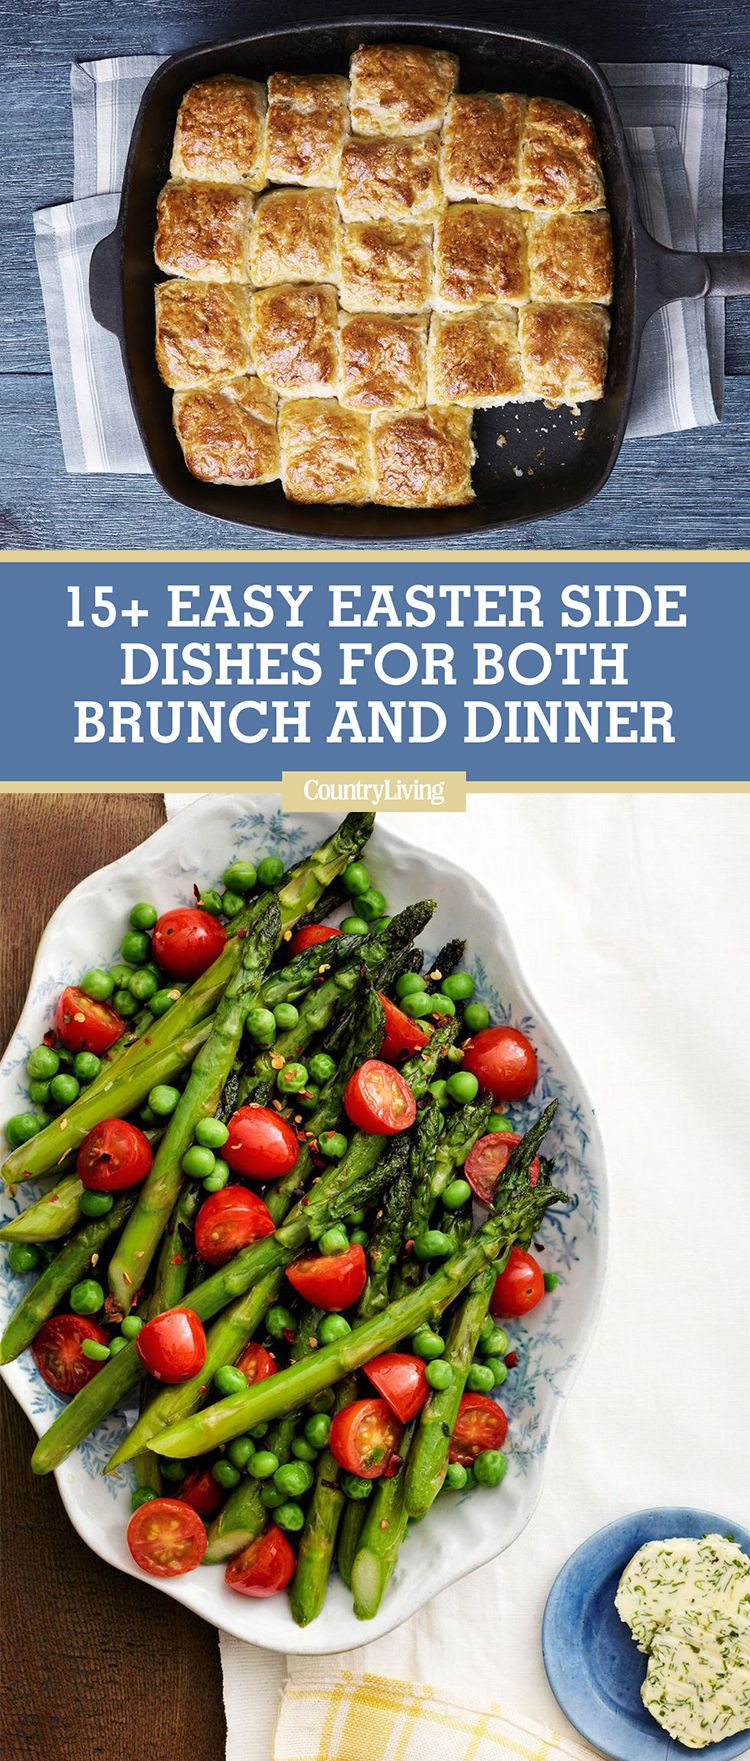 Easter Dinner Sides With Ham
 These Easter Side Dishes Are Bound to Upstage Your Ham